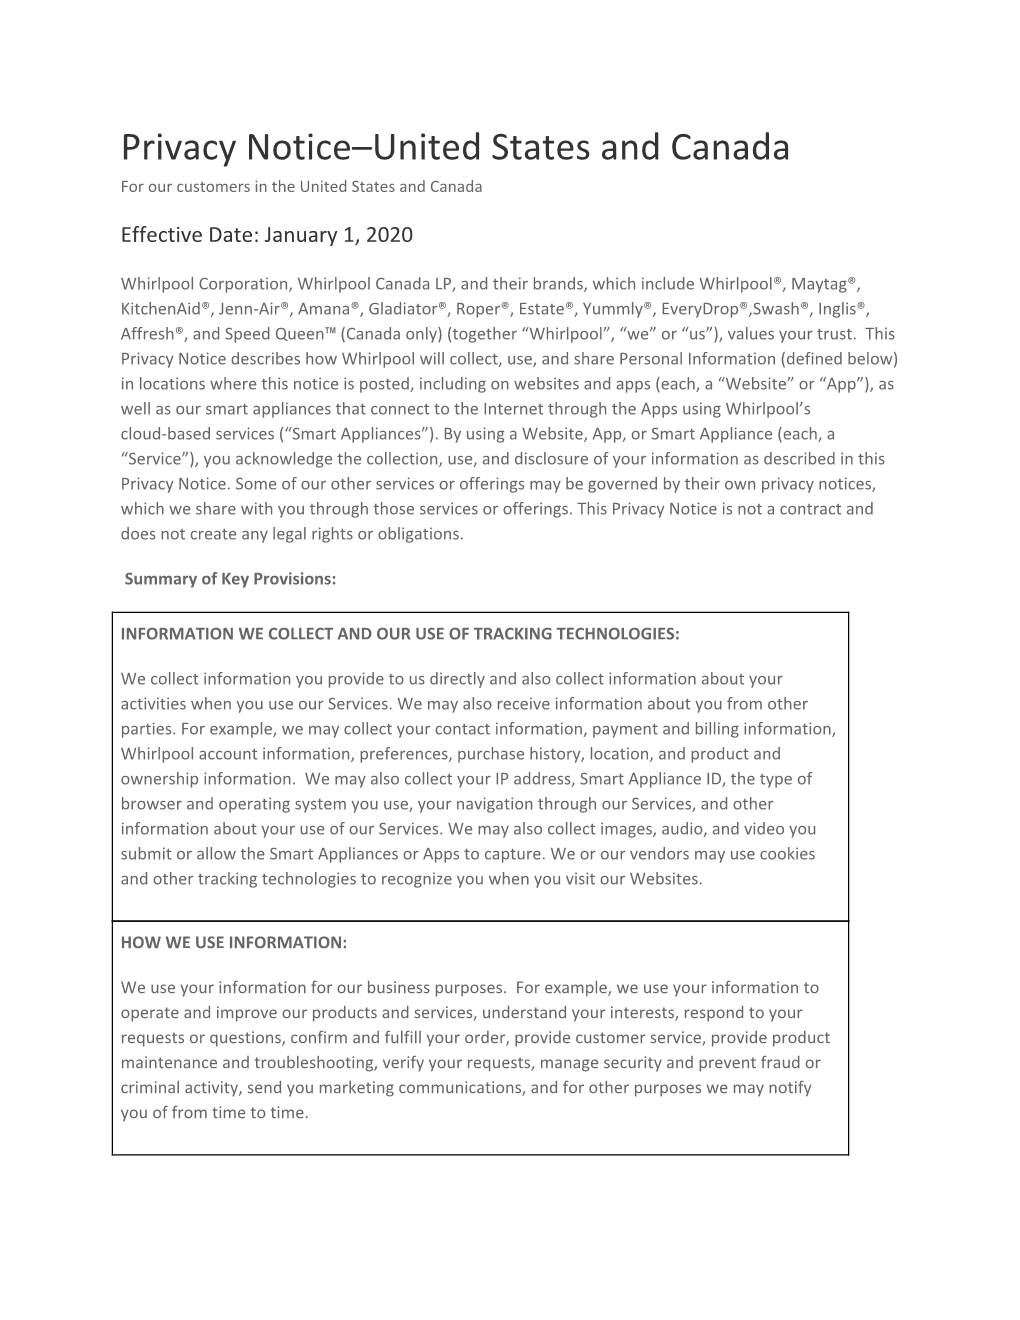 Privacy Notice–United States and Canada for Our Customers in the United States and Canada